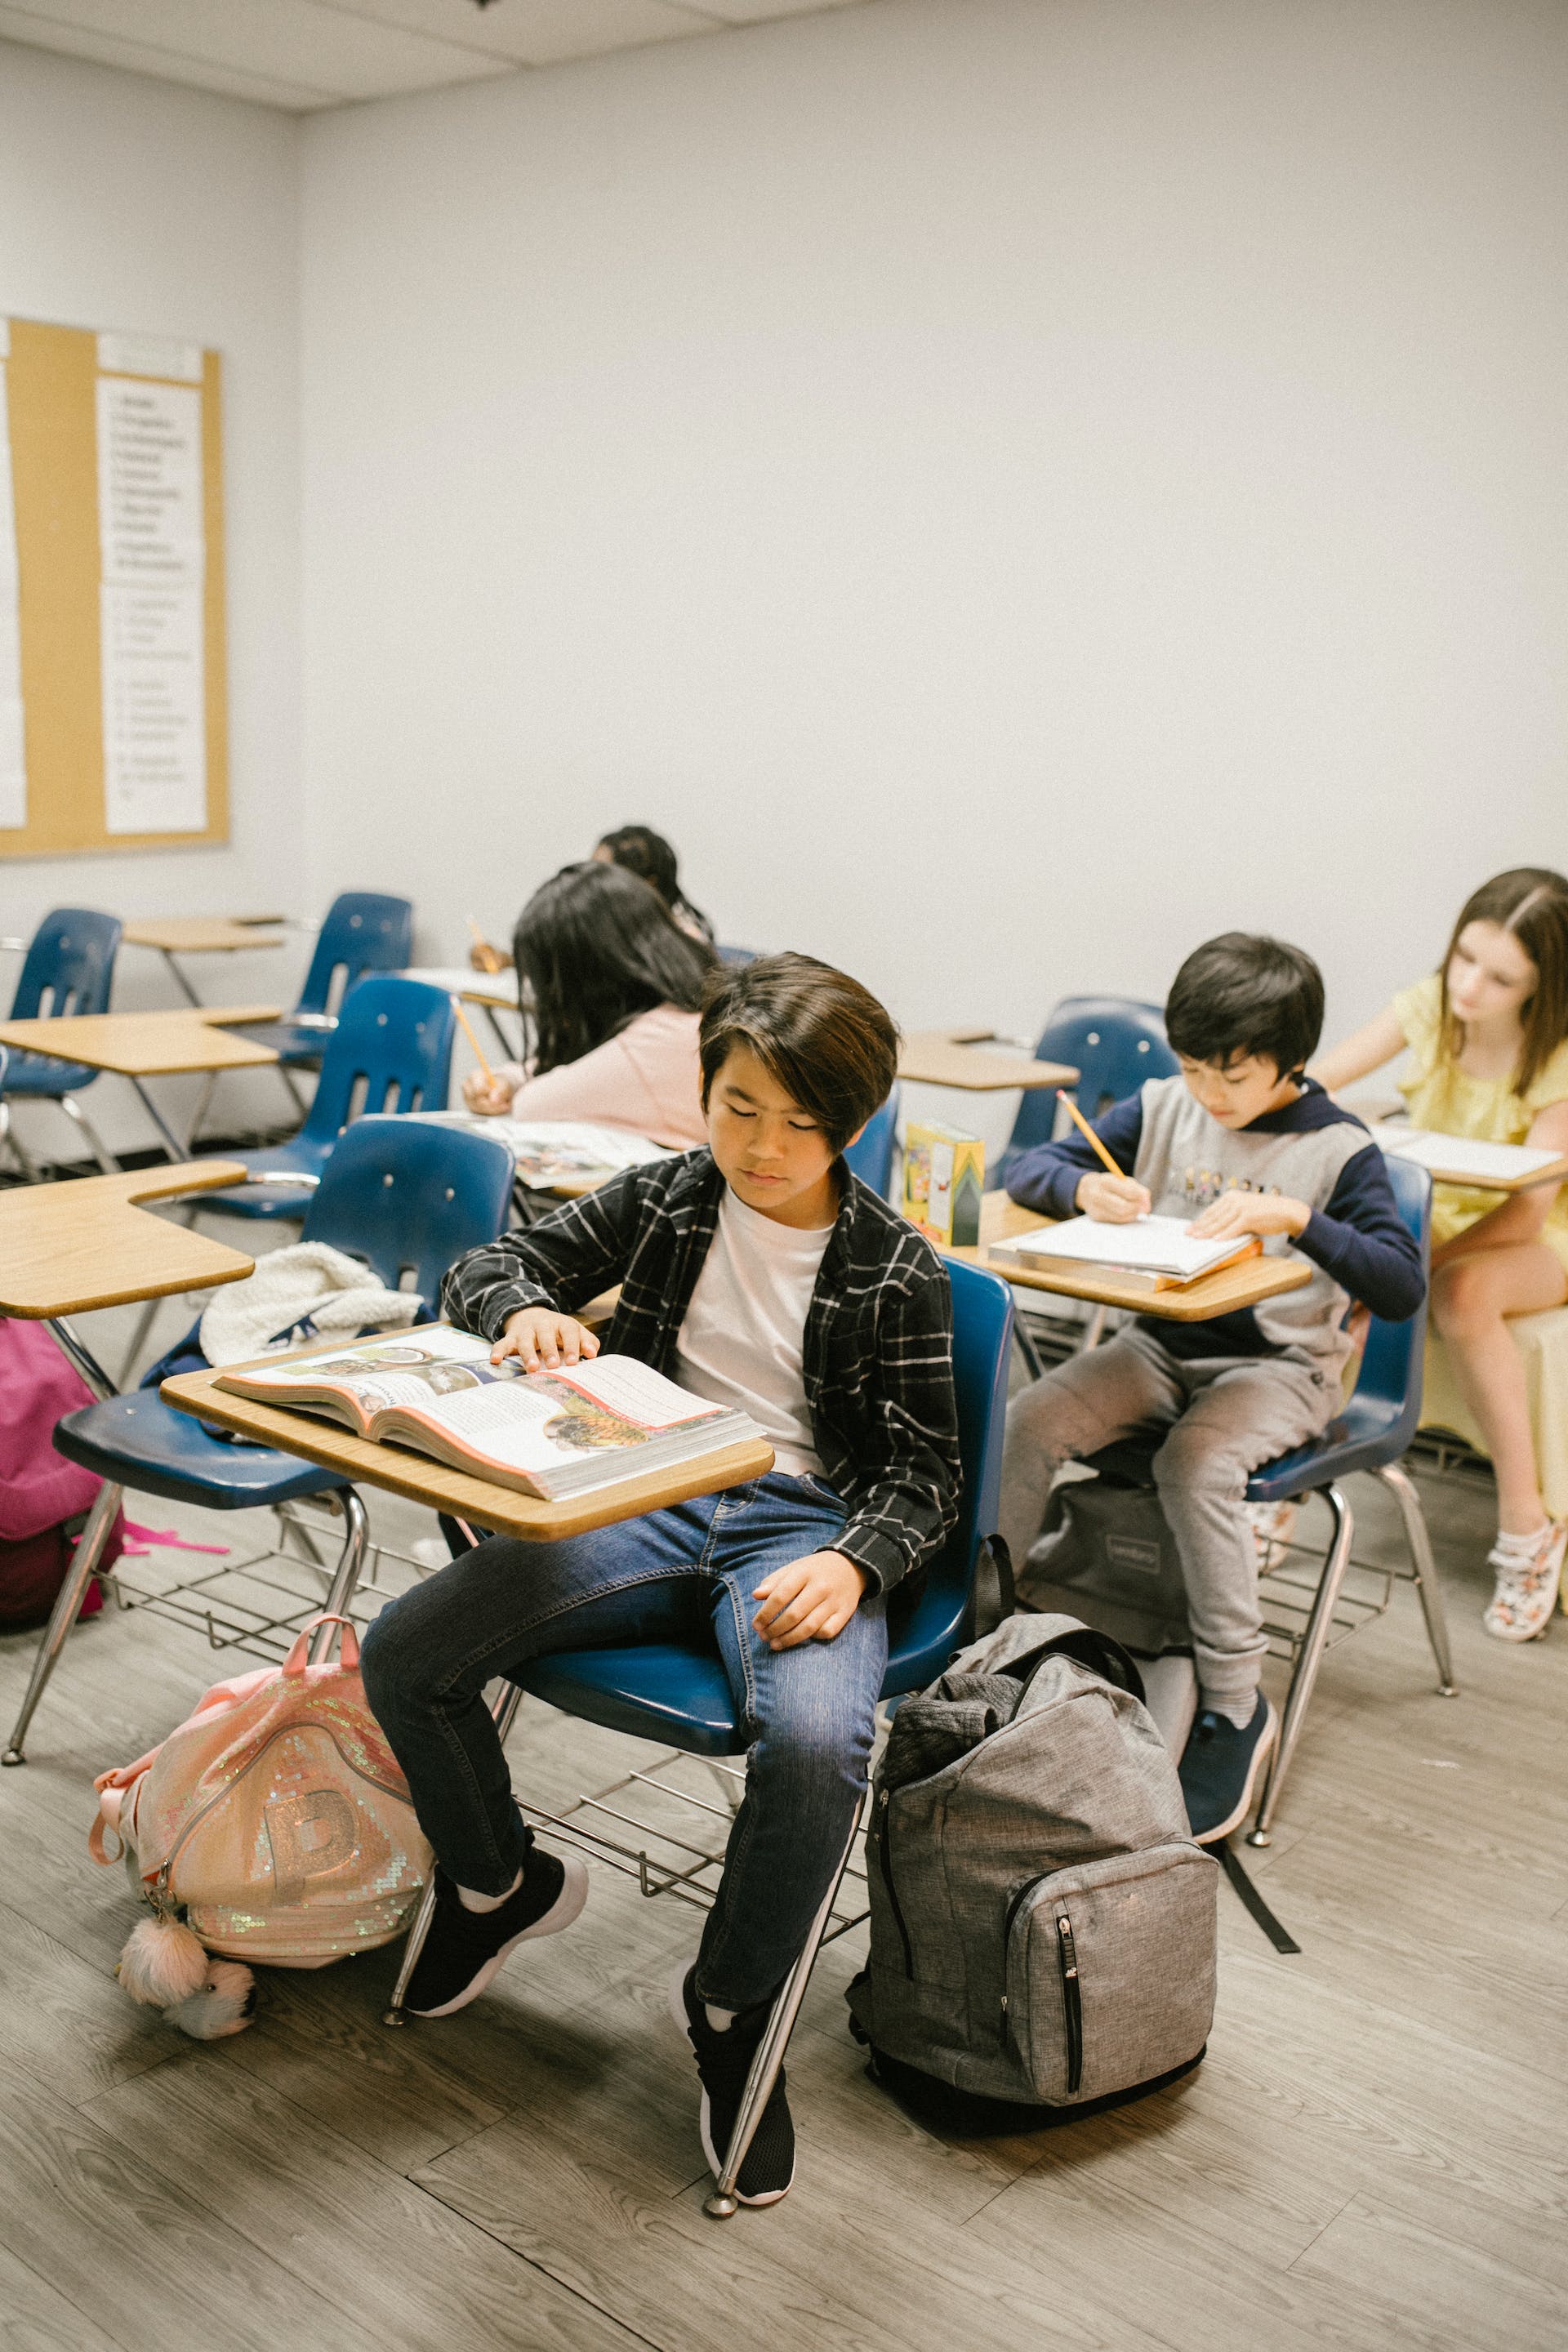 Students in a classroom | Source: Pexels